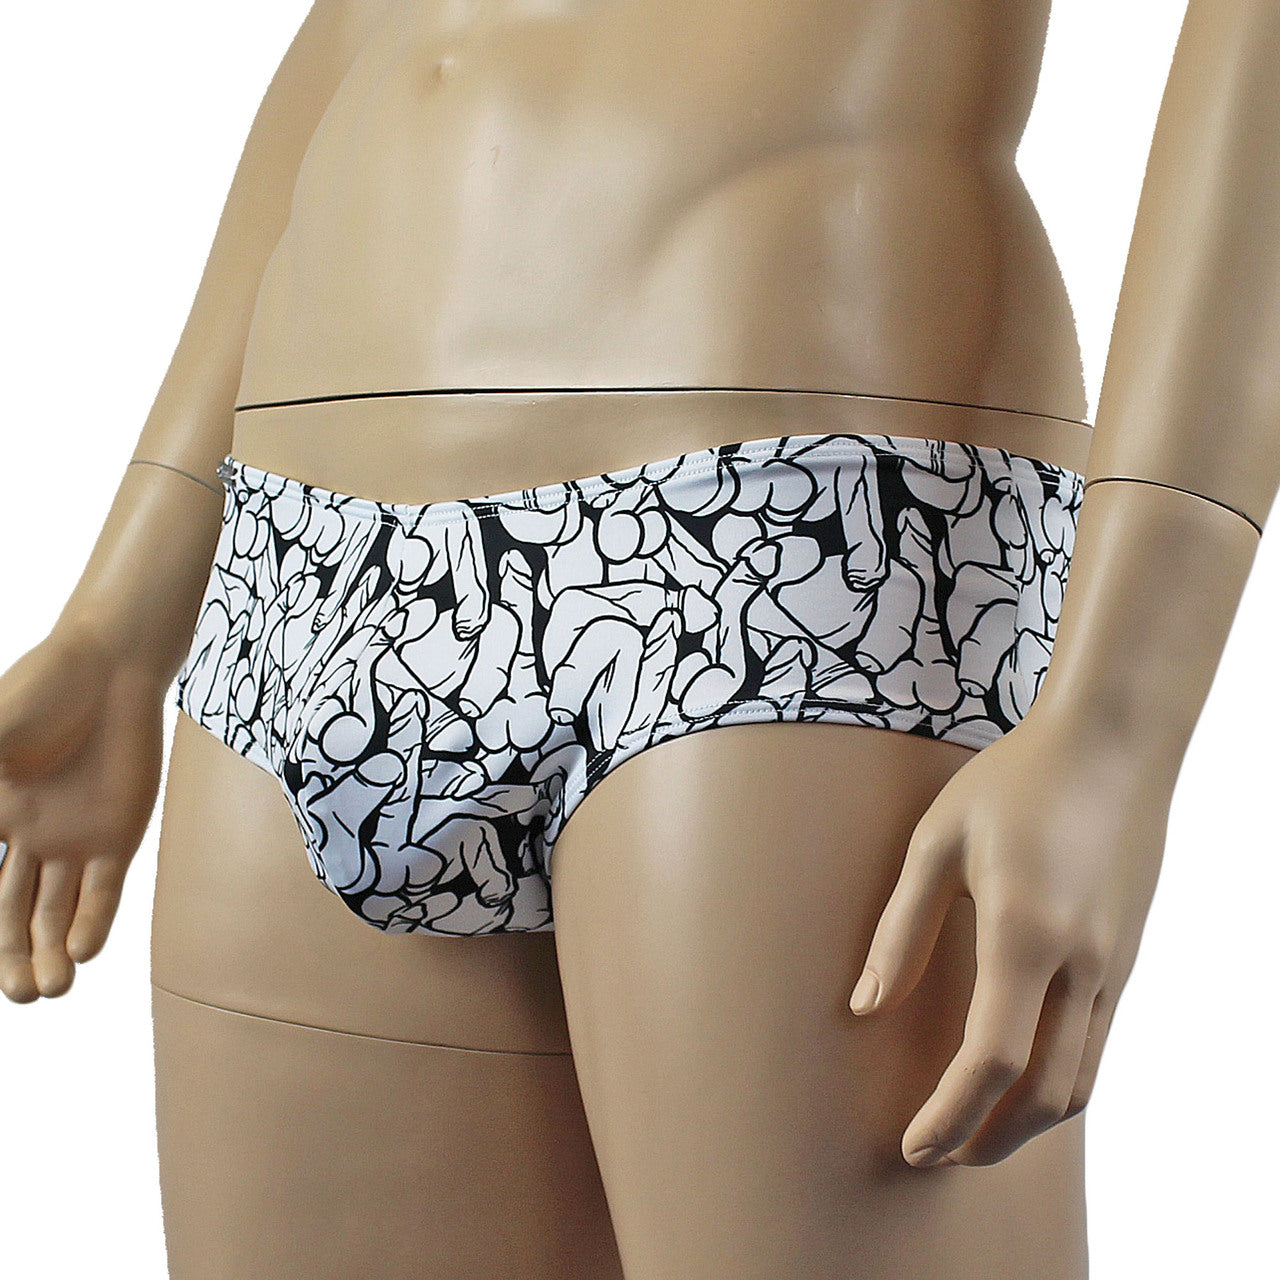 Male Willie Boxer Brief with Penis Print Black and White